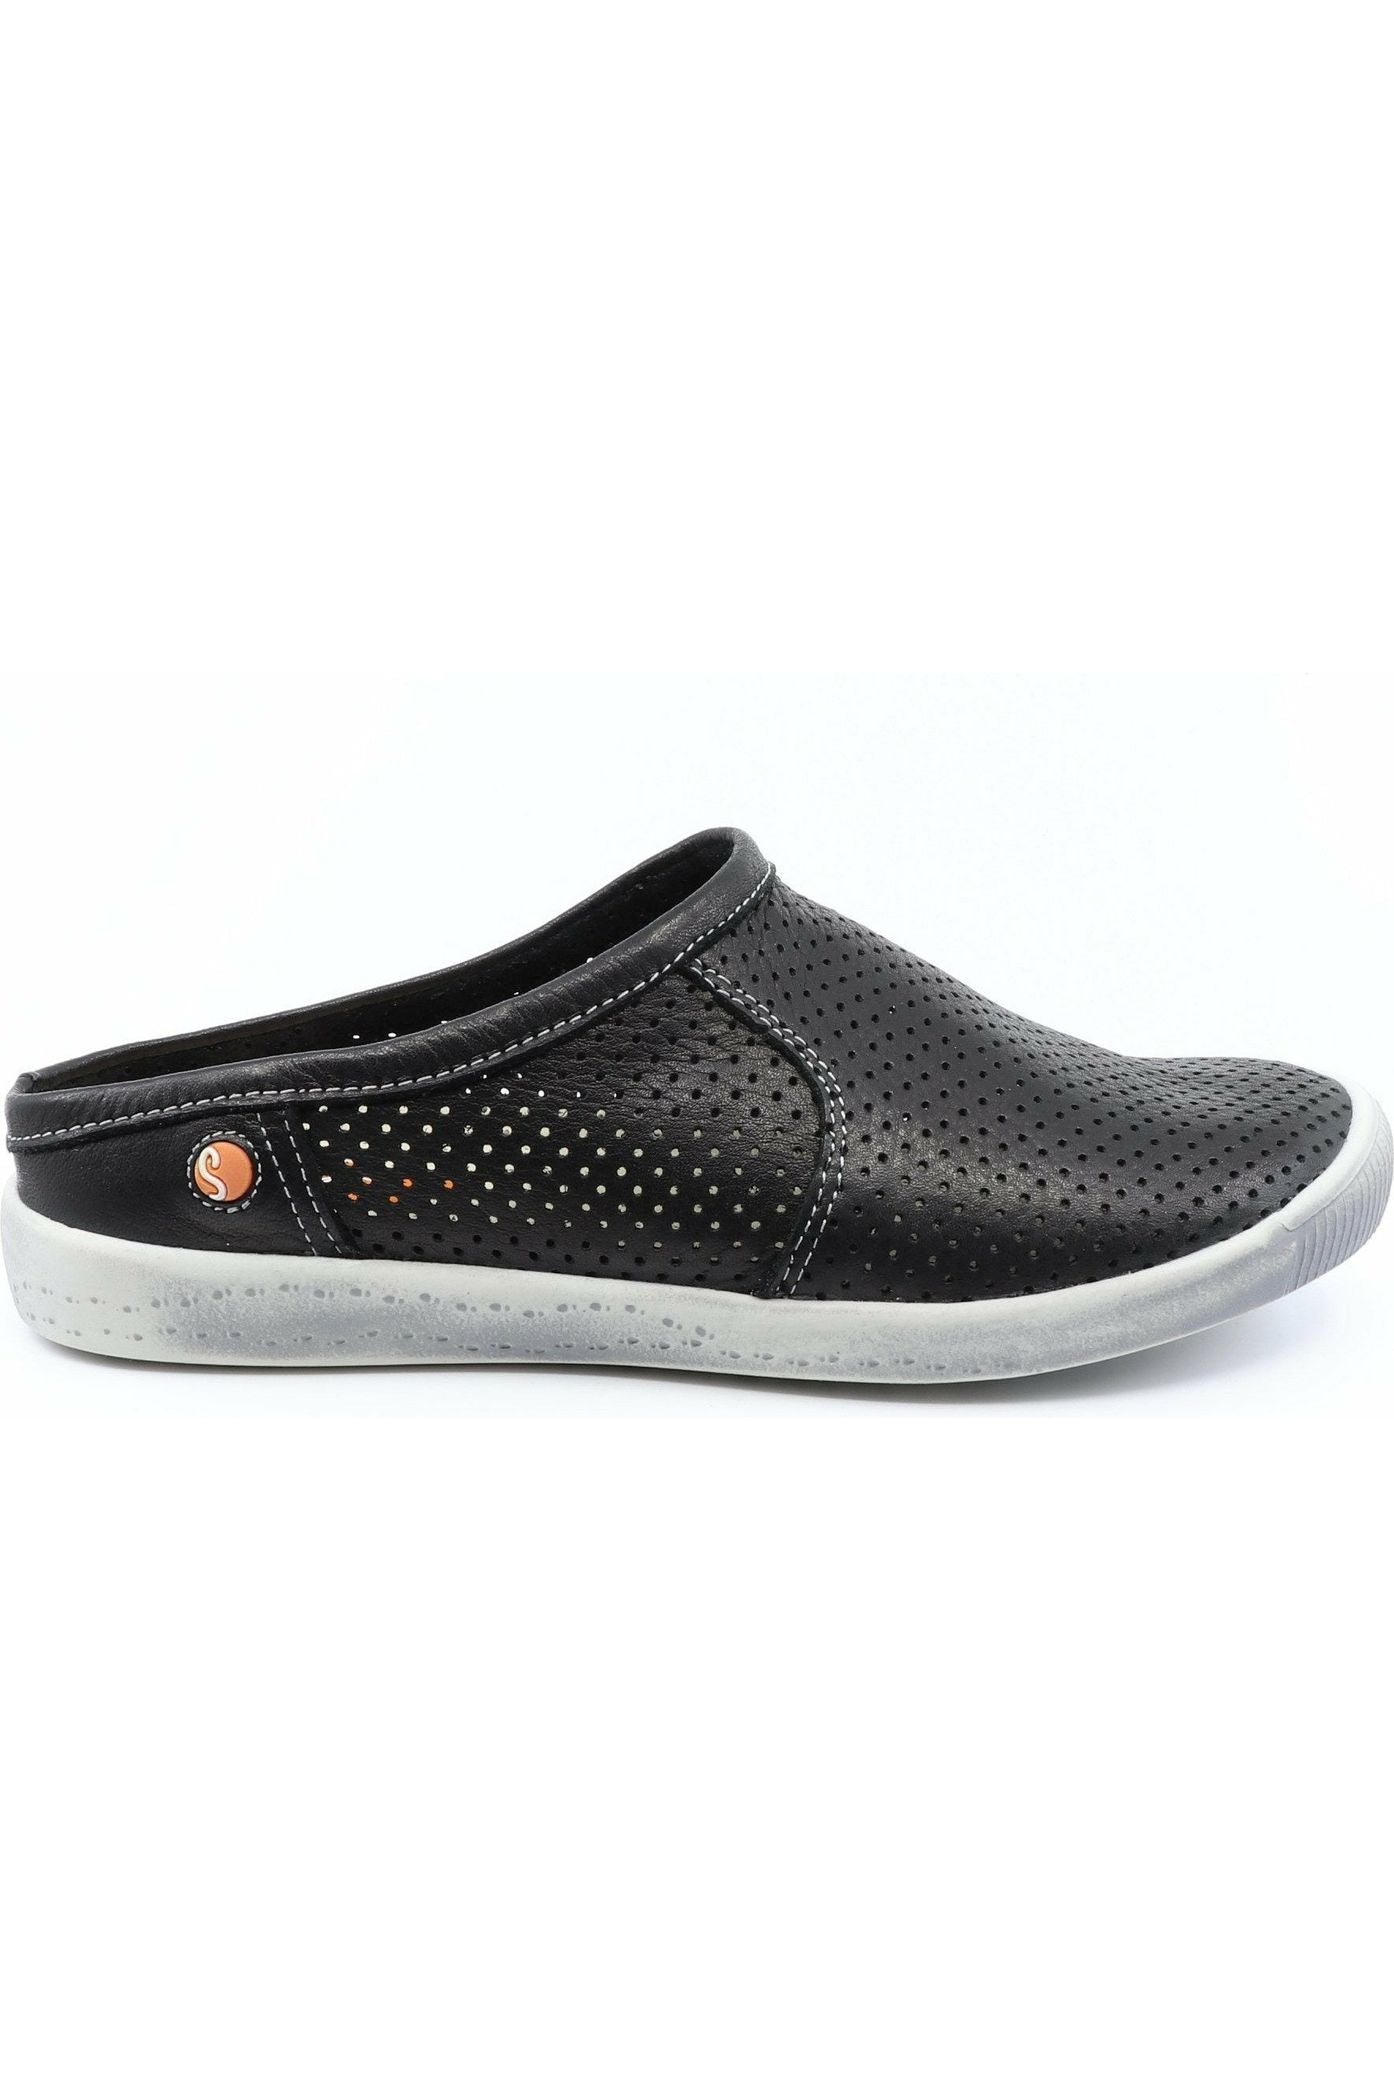 Softinos by Fly London Sneaker Mule - Style Ima, outside